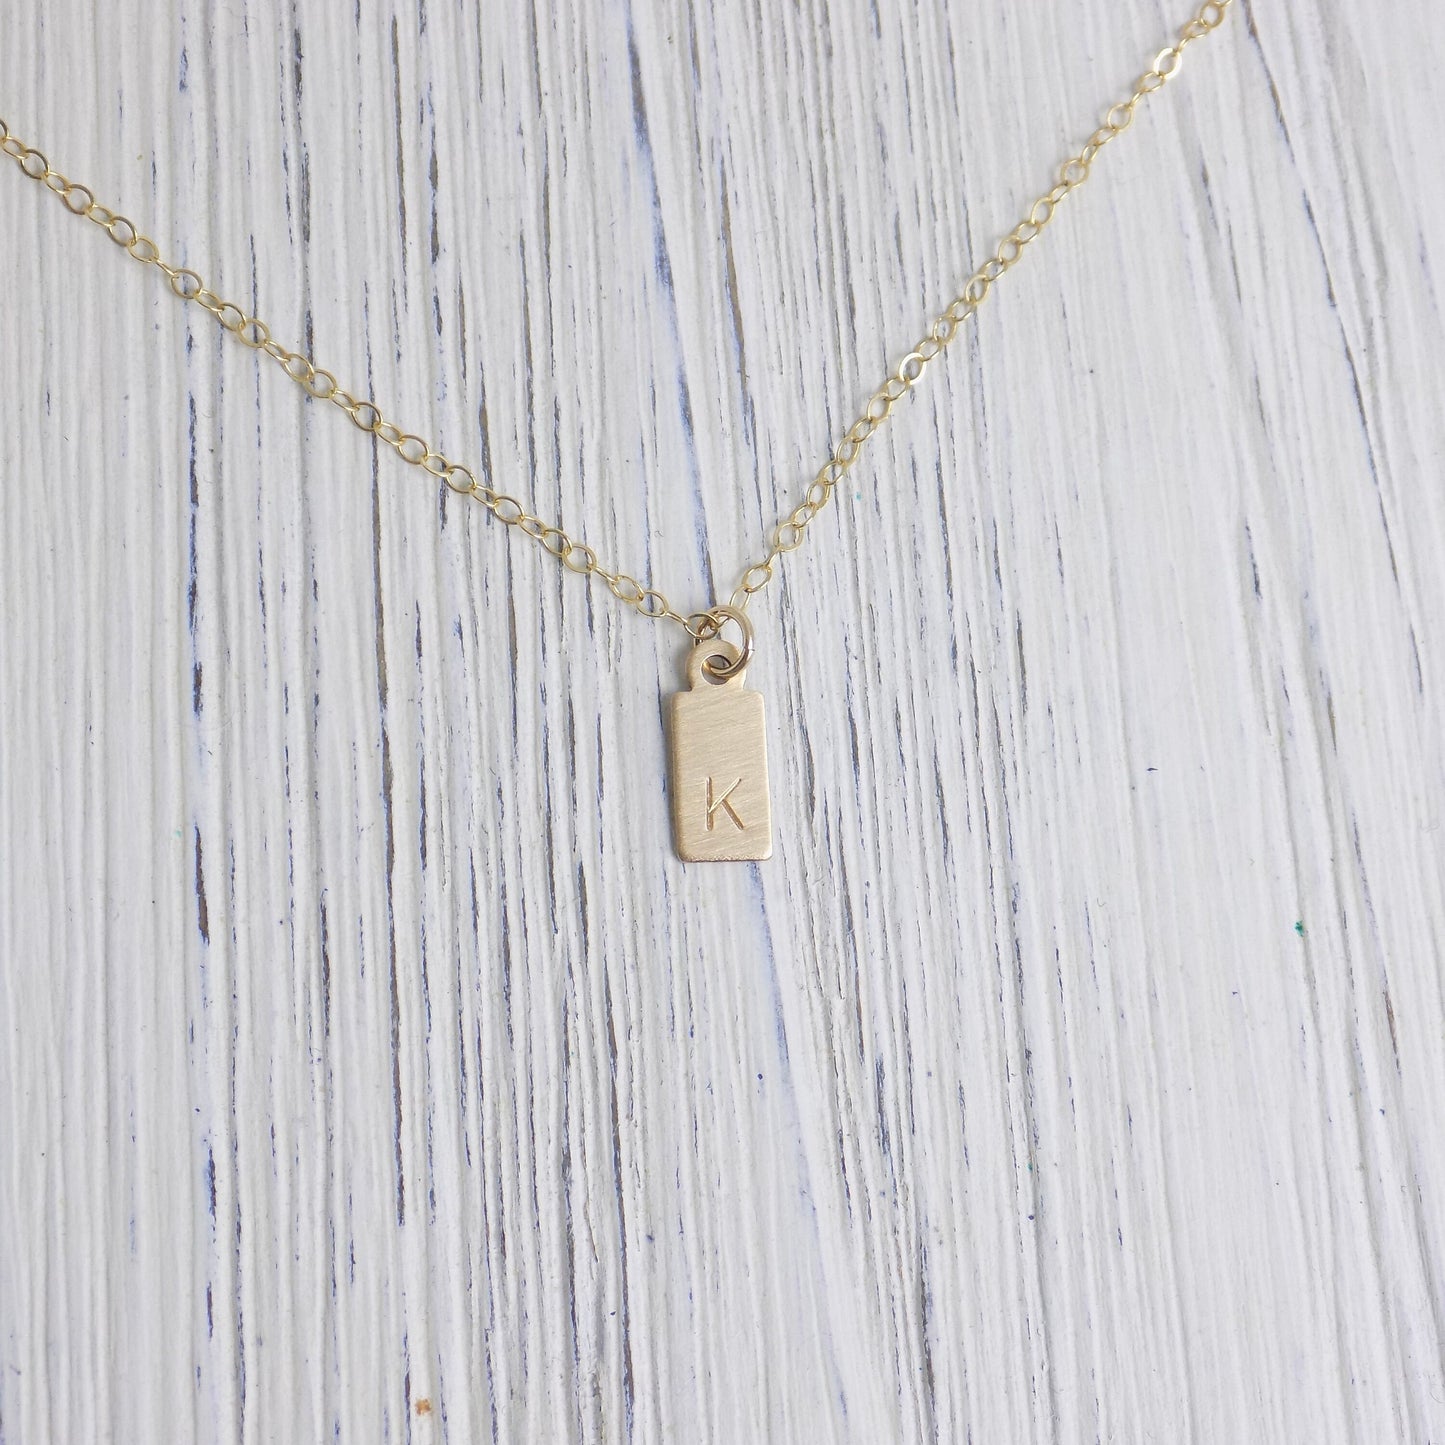 Dainty Tag Necklace - Initial Necklace - 14K Gold Filled Brushed Matte Satin Finish - Personalized Necklace Layering - Birthday Gift Women